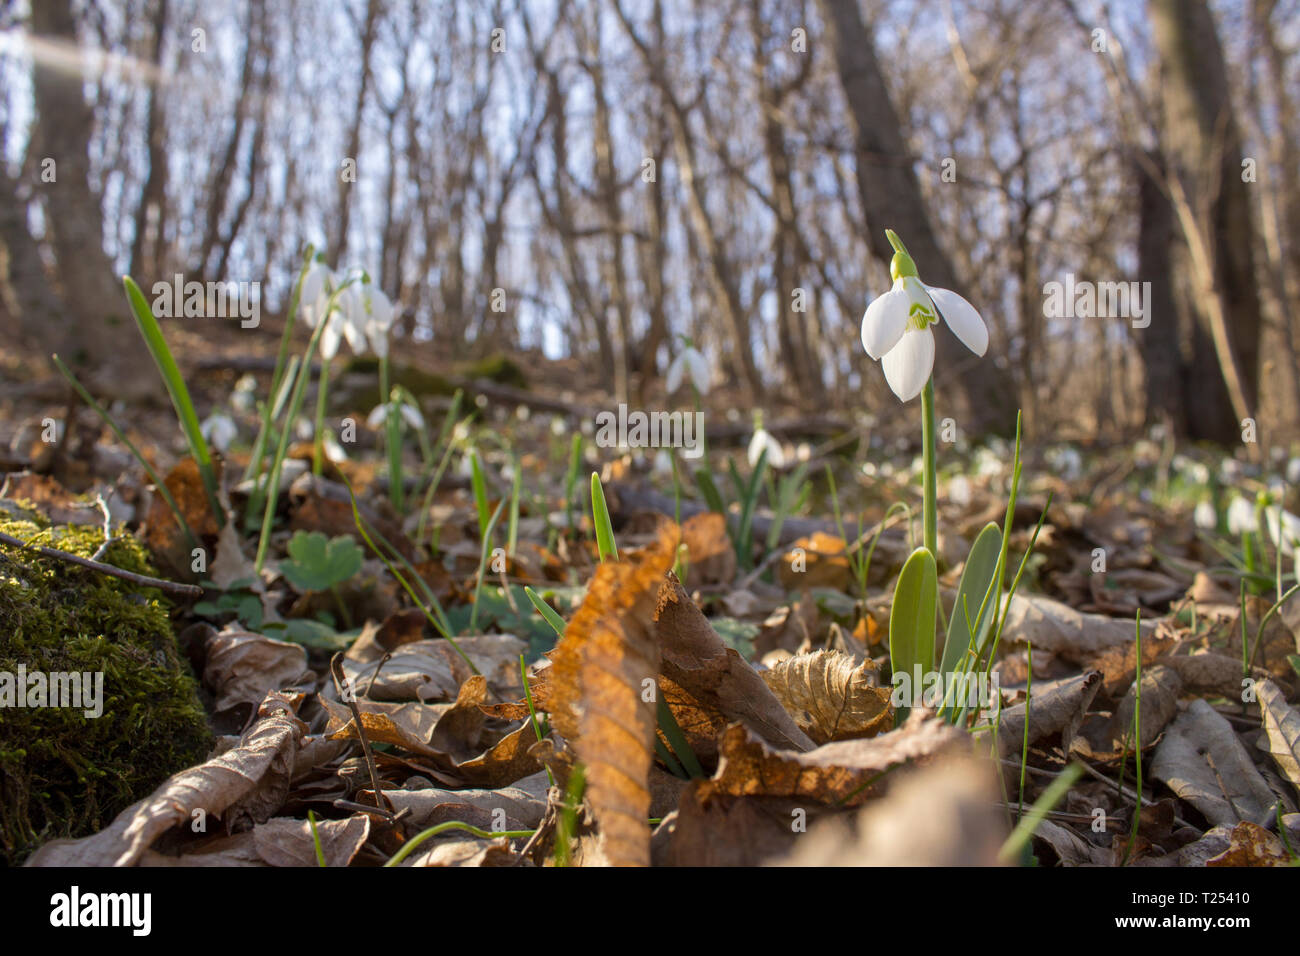 Glade full of snowdrops growing through last year's leaves in the forest. Close up Stock Photo